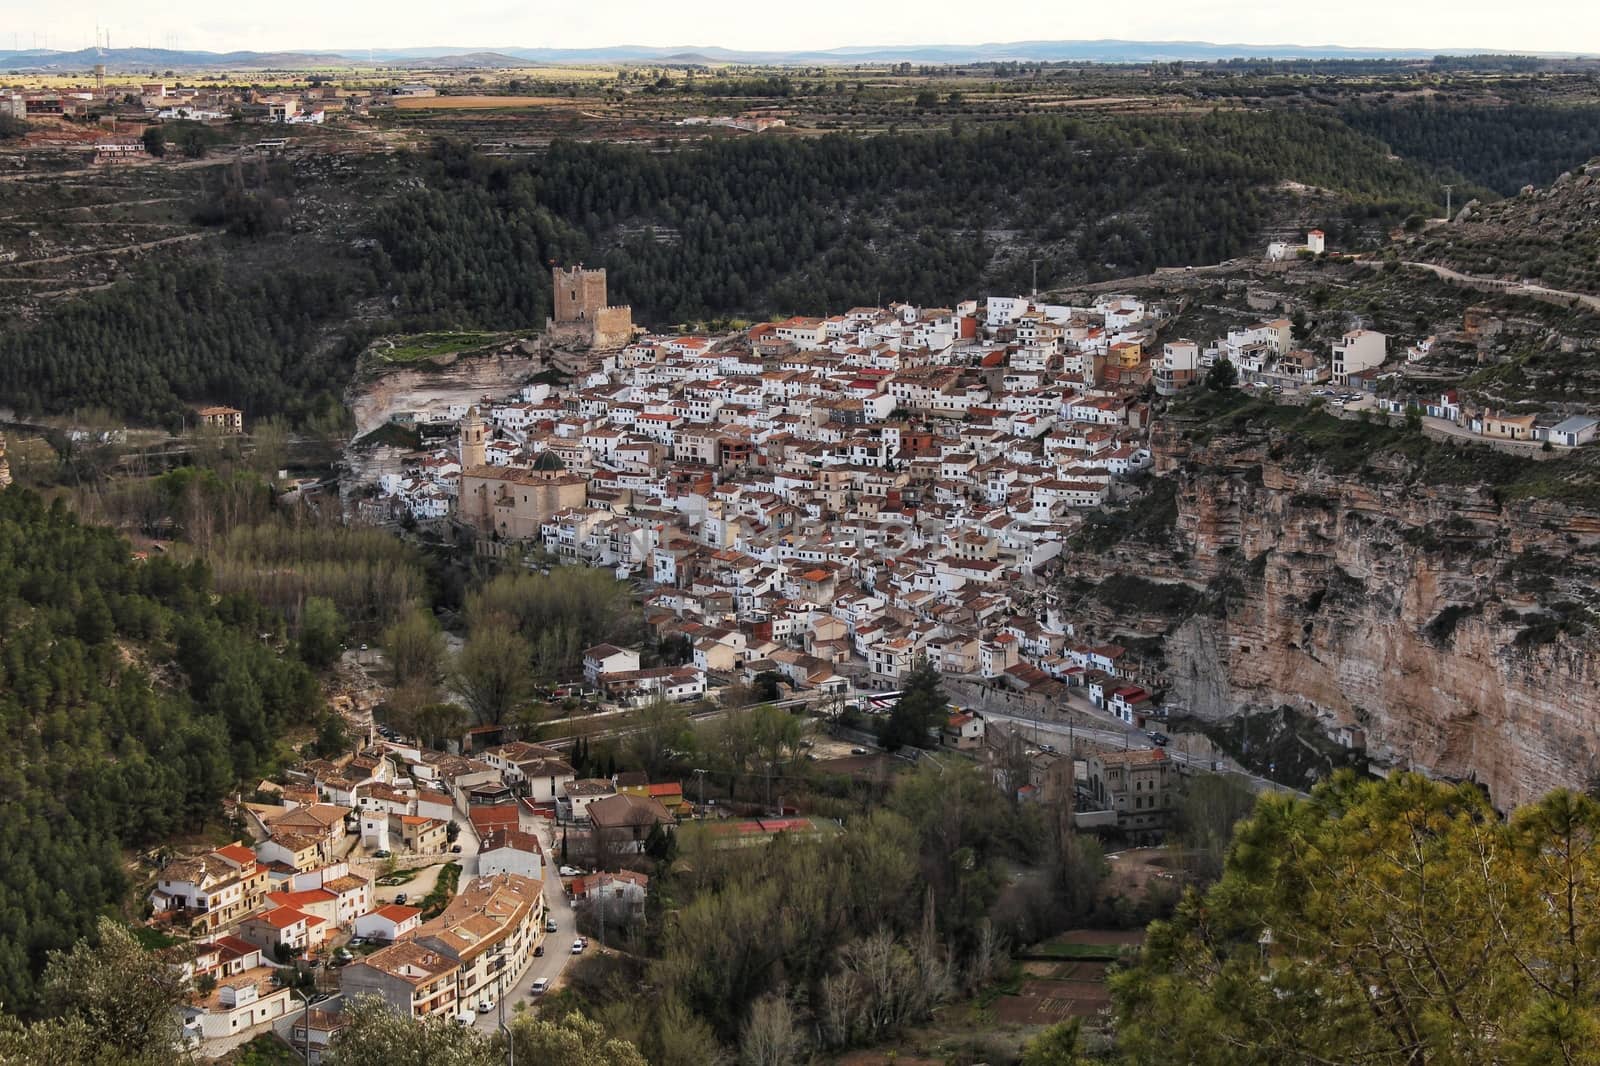 Views of the village of Alcala del Jucar in the morning from the viewpoint in Spring